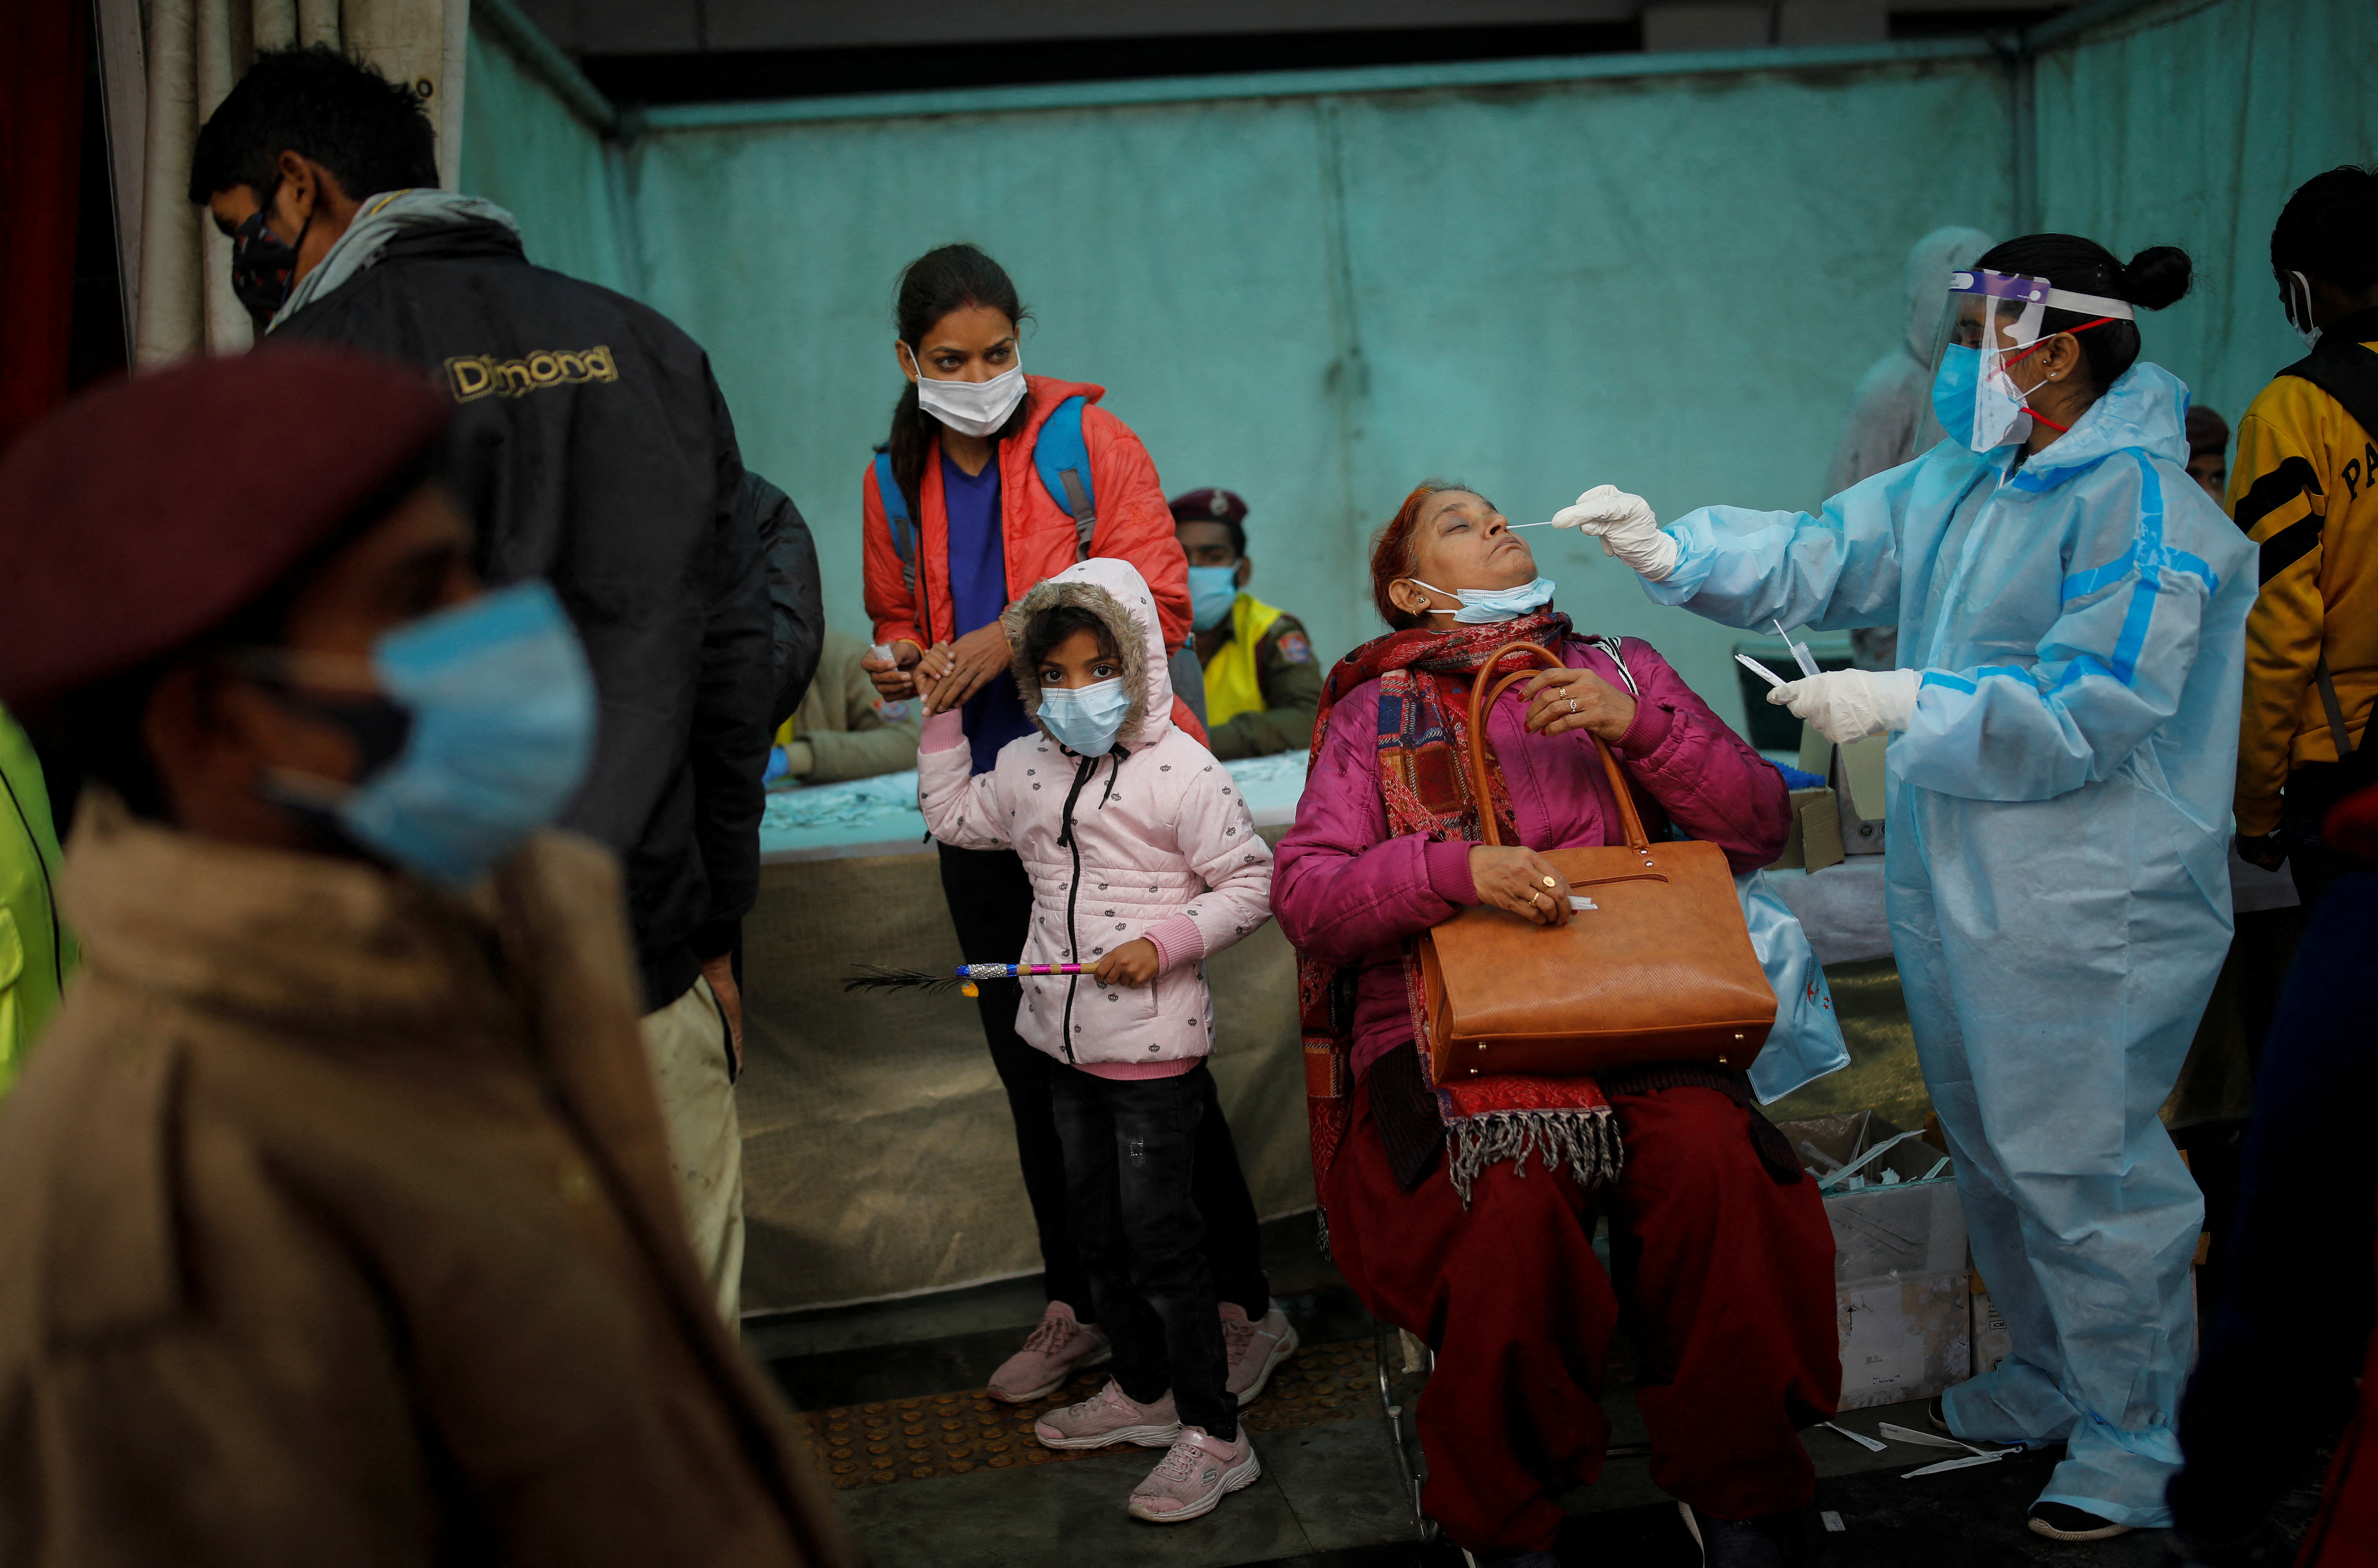 A healthcare worker collects a coronavirus disease (COVID-19) test swab sample from a woman amidst the spread of the disease, at a railway station in New Delhi, India, January 5, 2022. REUTERS/Adnan Abidi 